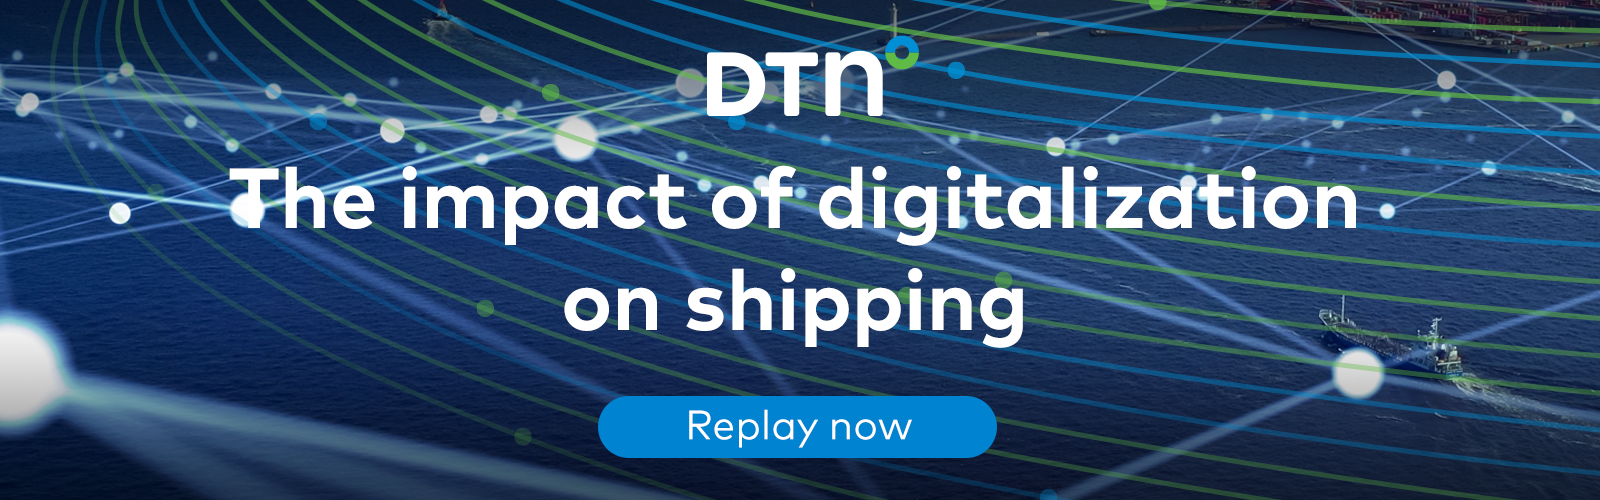 DTN | The impacts of digitalization on shipping | Replay now